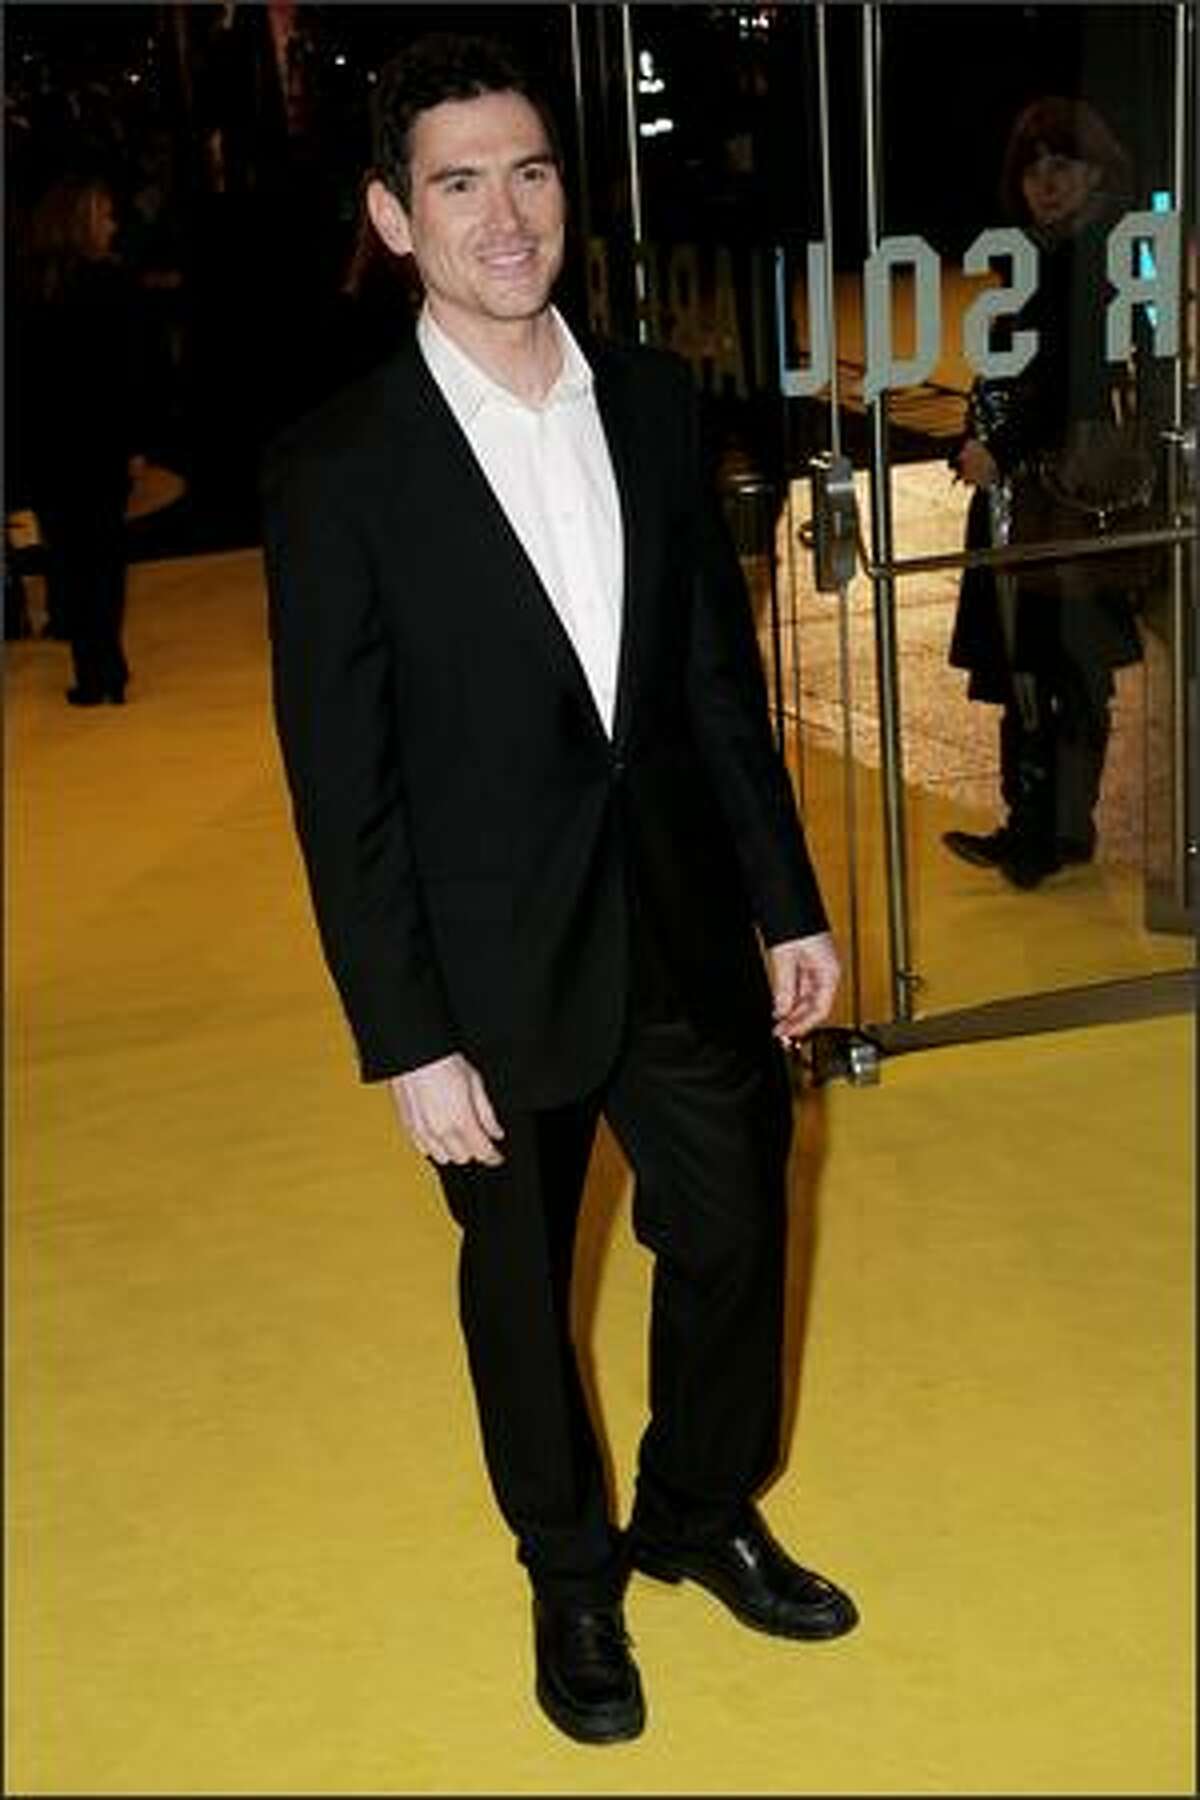 Billy Crudup attends the UK premiere of "Watchmen" at the Odeon, Leicester Square in London, England.